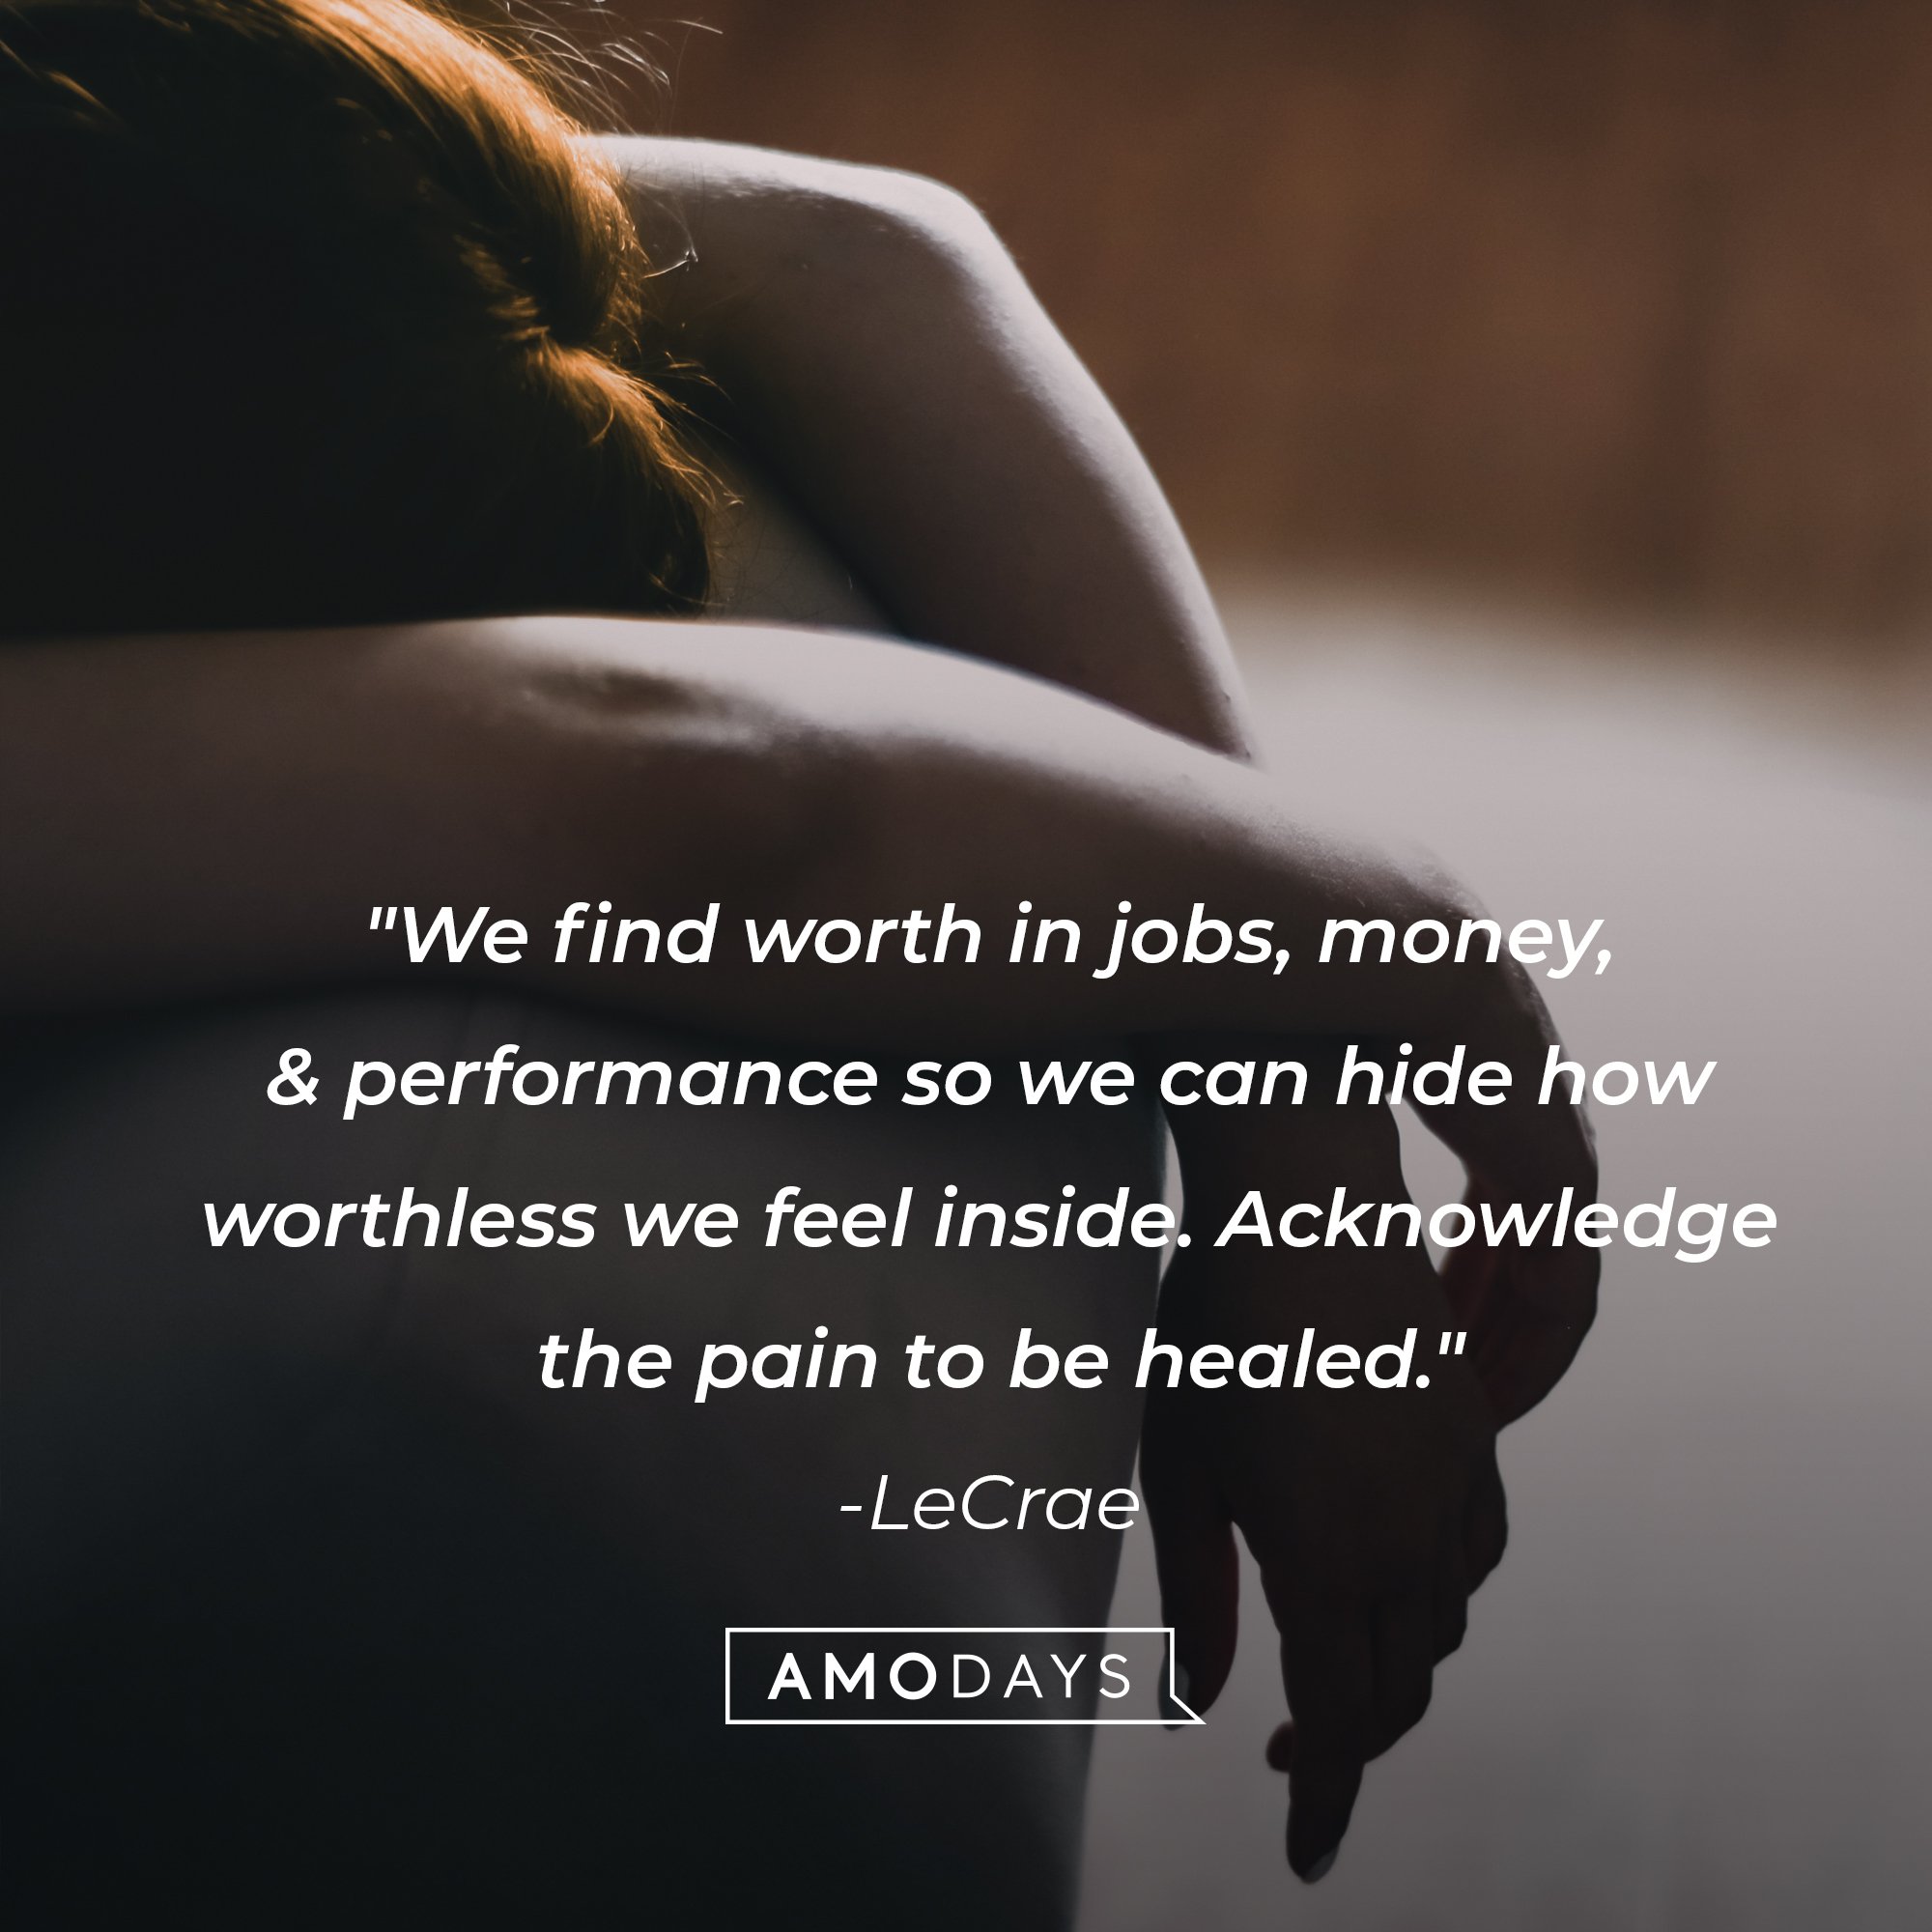 LeCrae's quote: "We find worth in jobs, money, & performance so we can hide how worthless we feel inside. Acknowledge the pain to be healed." | Image: AmoDays